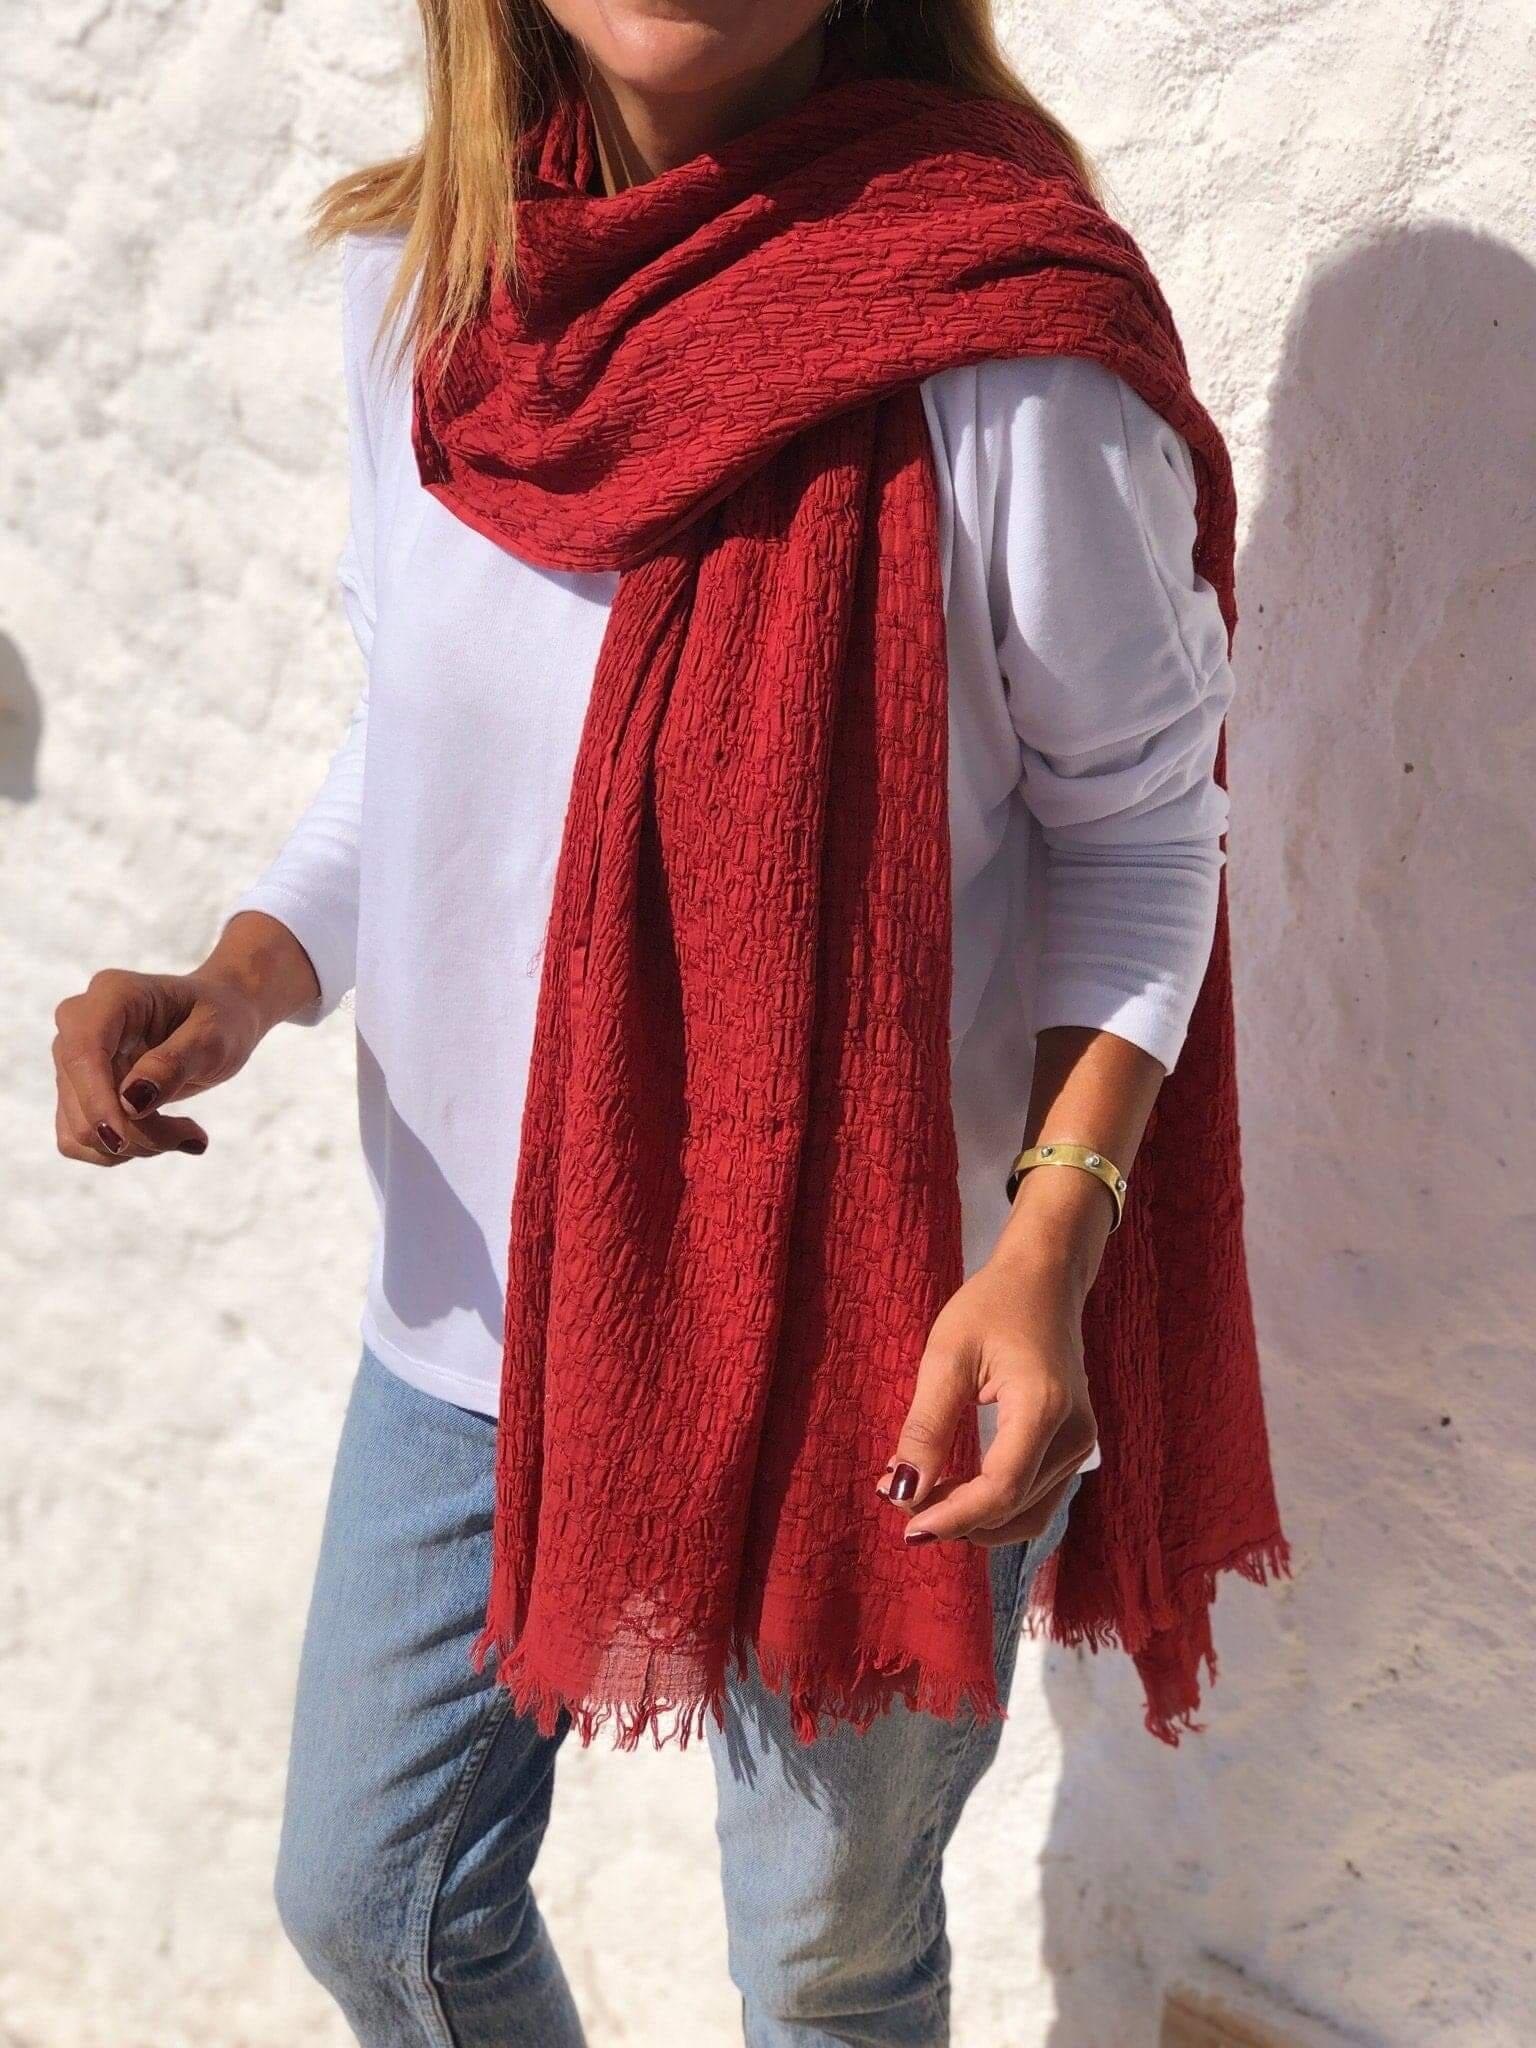 Premium Burgundy Organic Cotton Scarf - 100% Eco-Friendly Rectangle Scarf for Her available at Moyoni Design